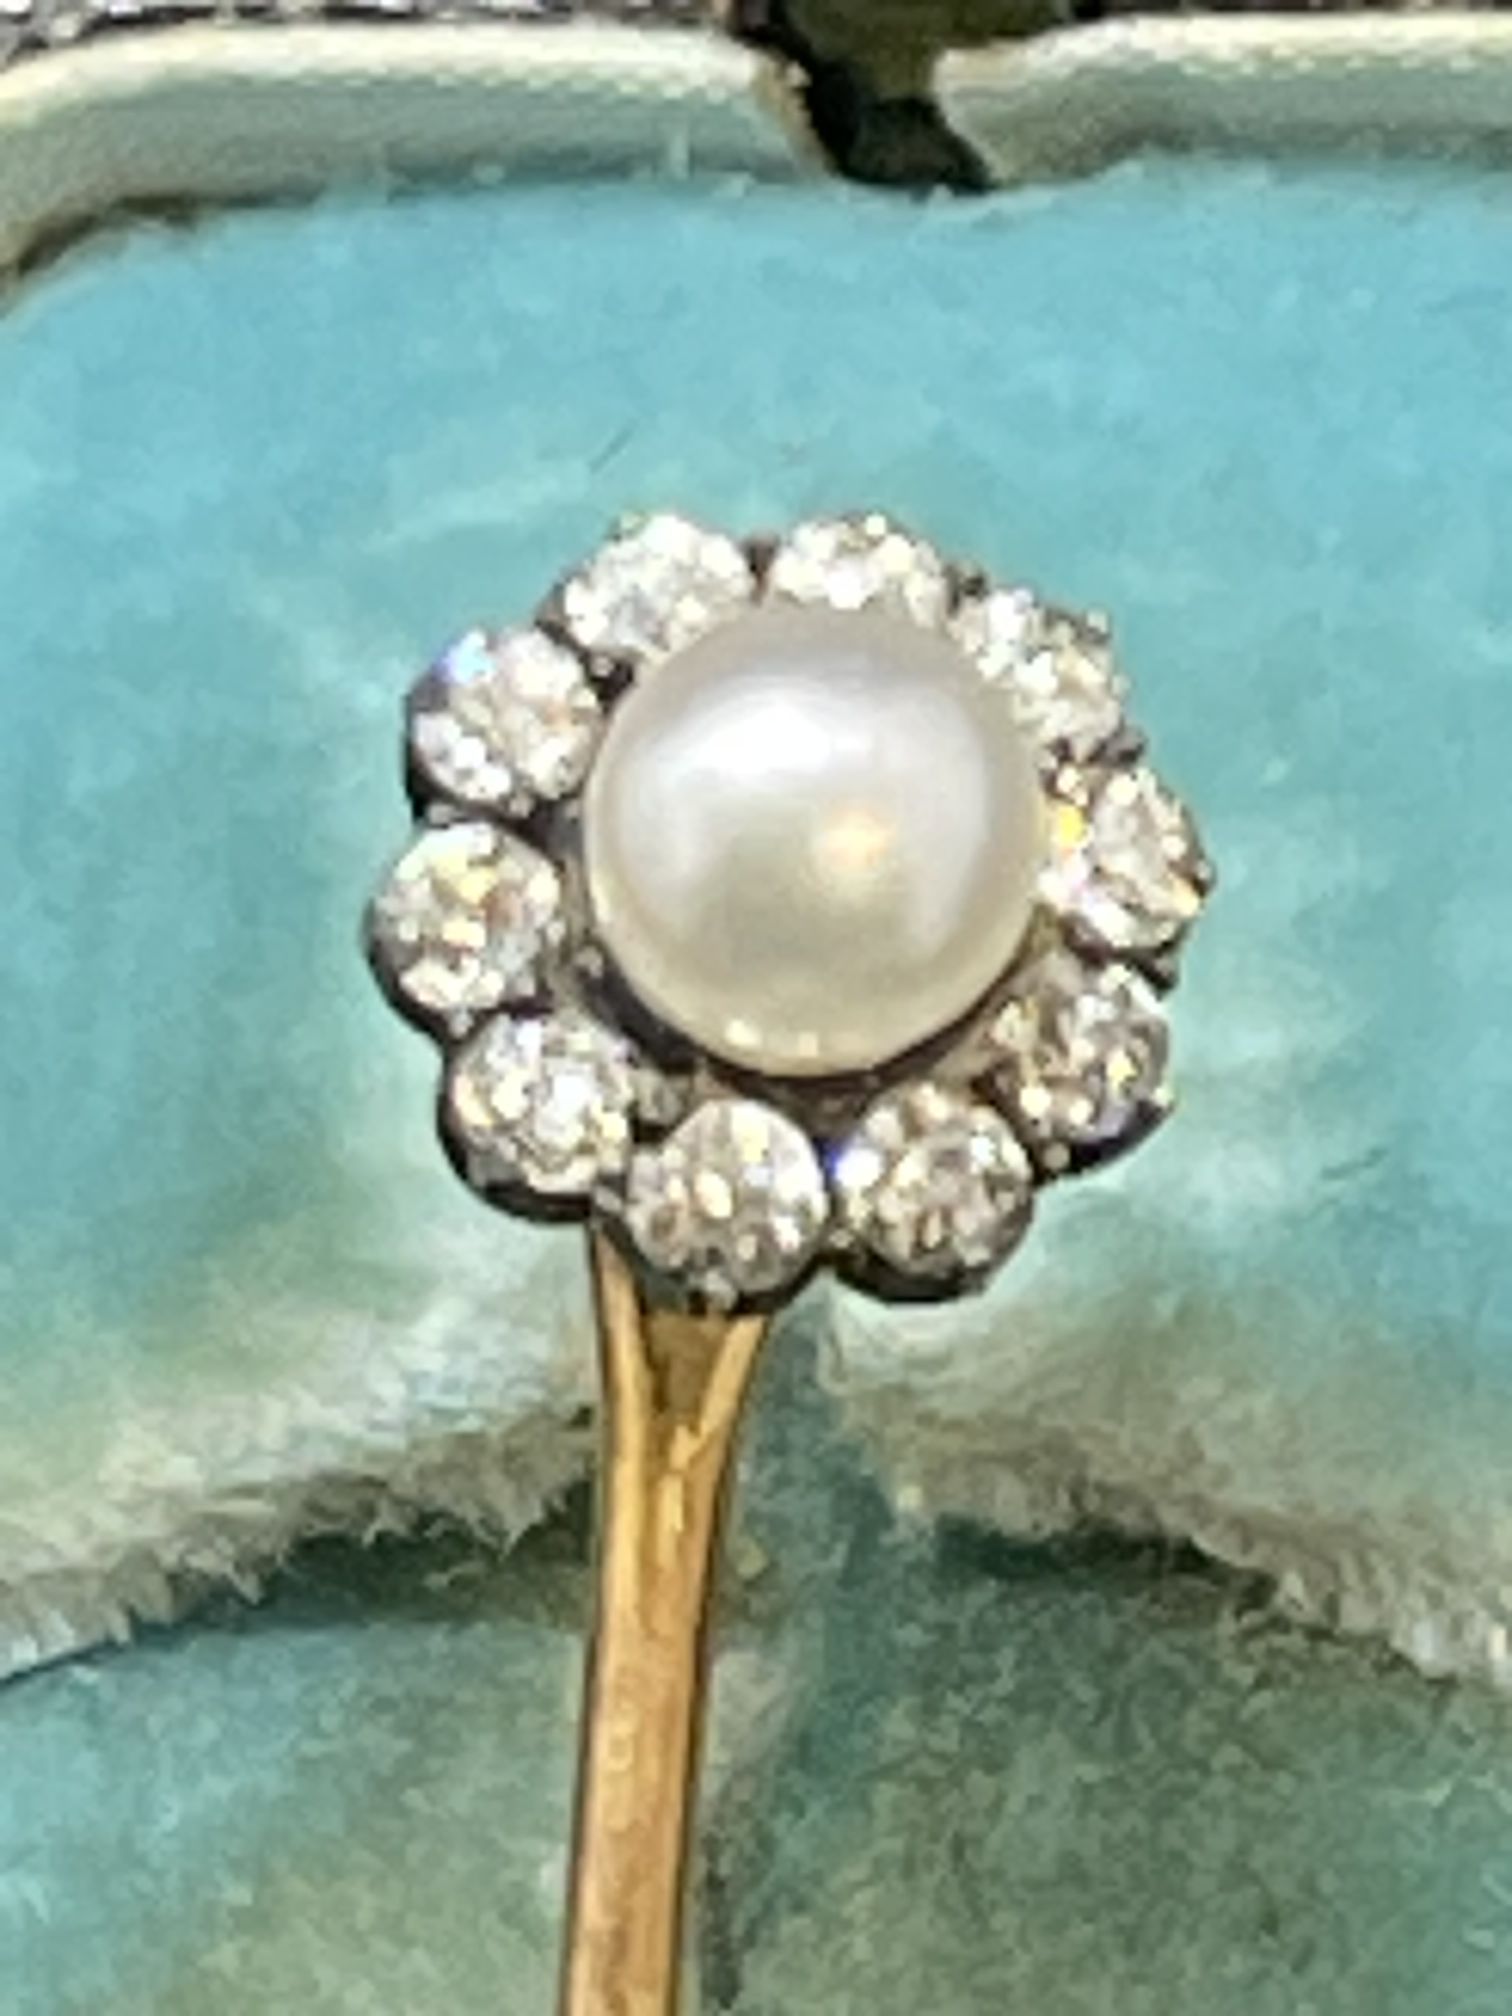 Jewellery: Early 20th century diamond and seed pearl tie pin. - Image 2 of 3